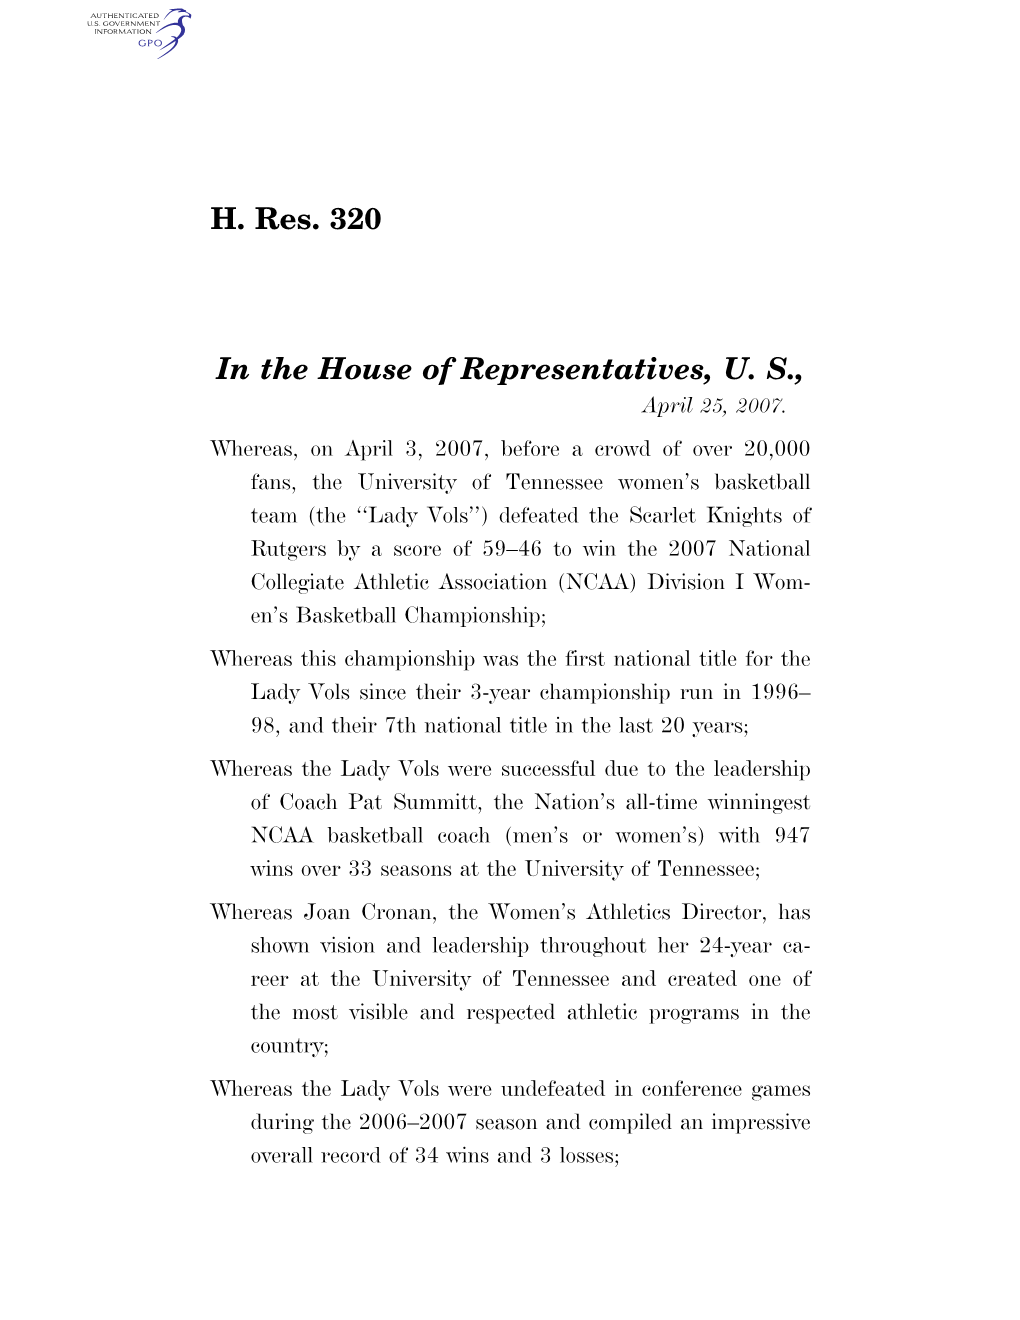 H. Res. 320 in the House of Representatives, U